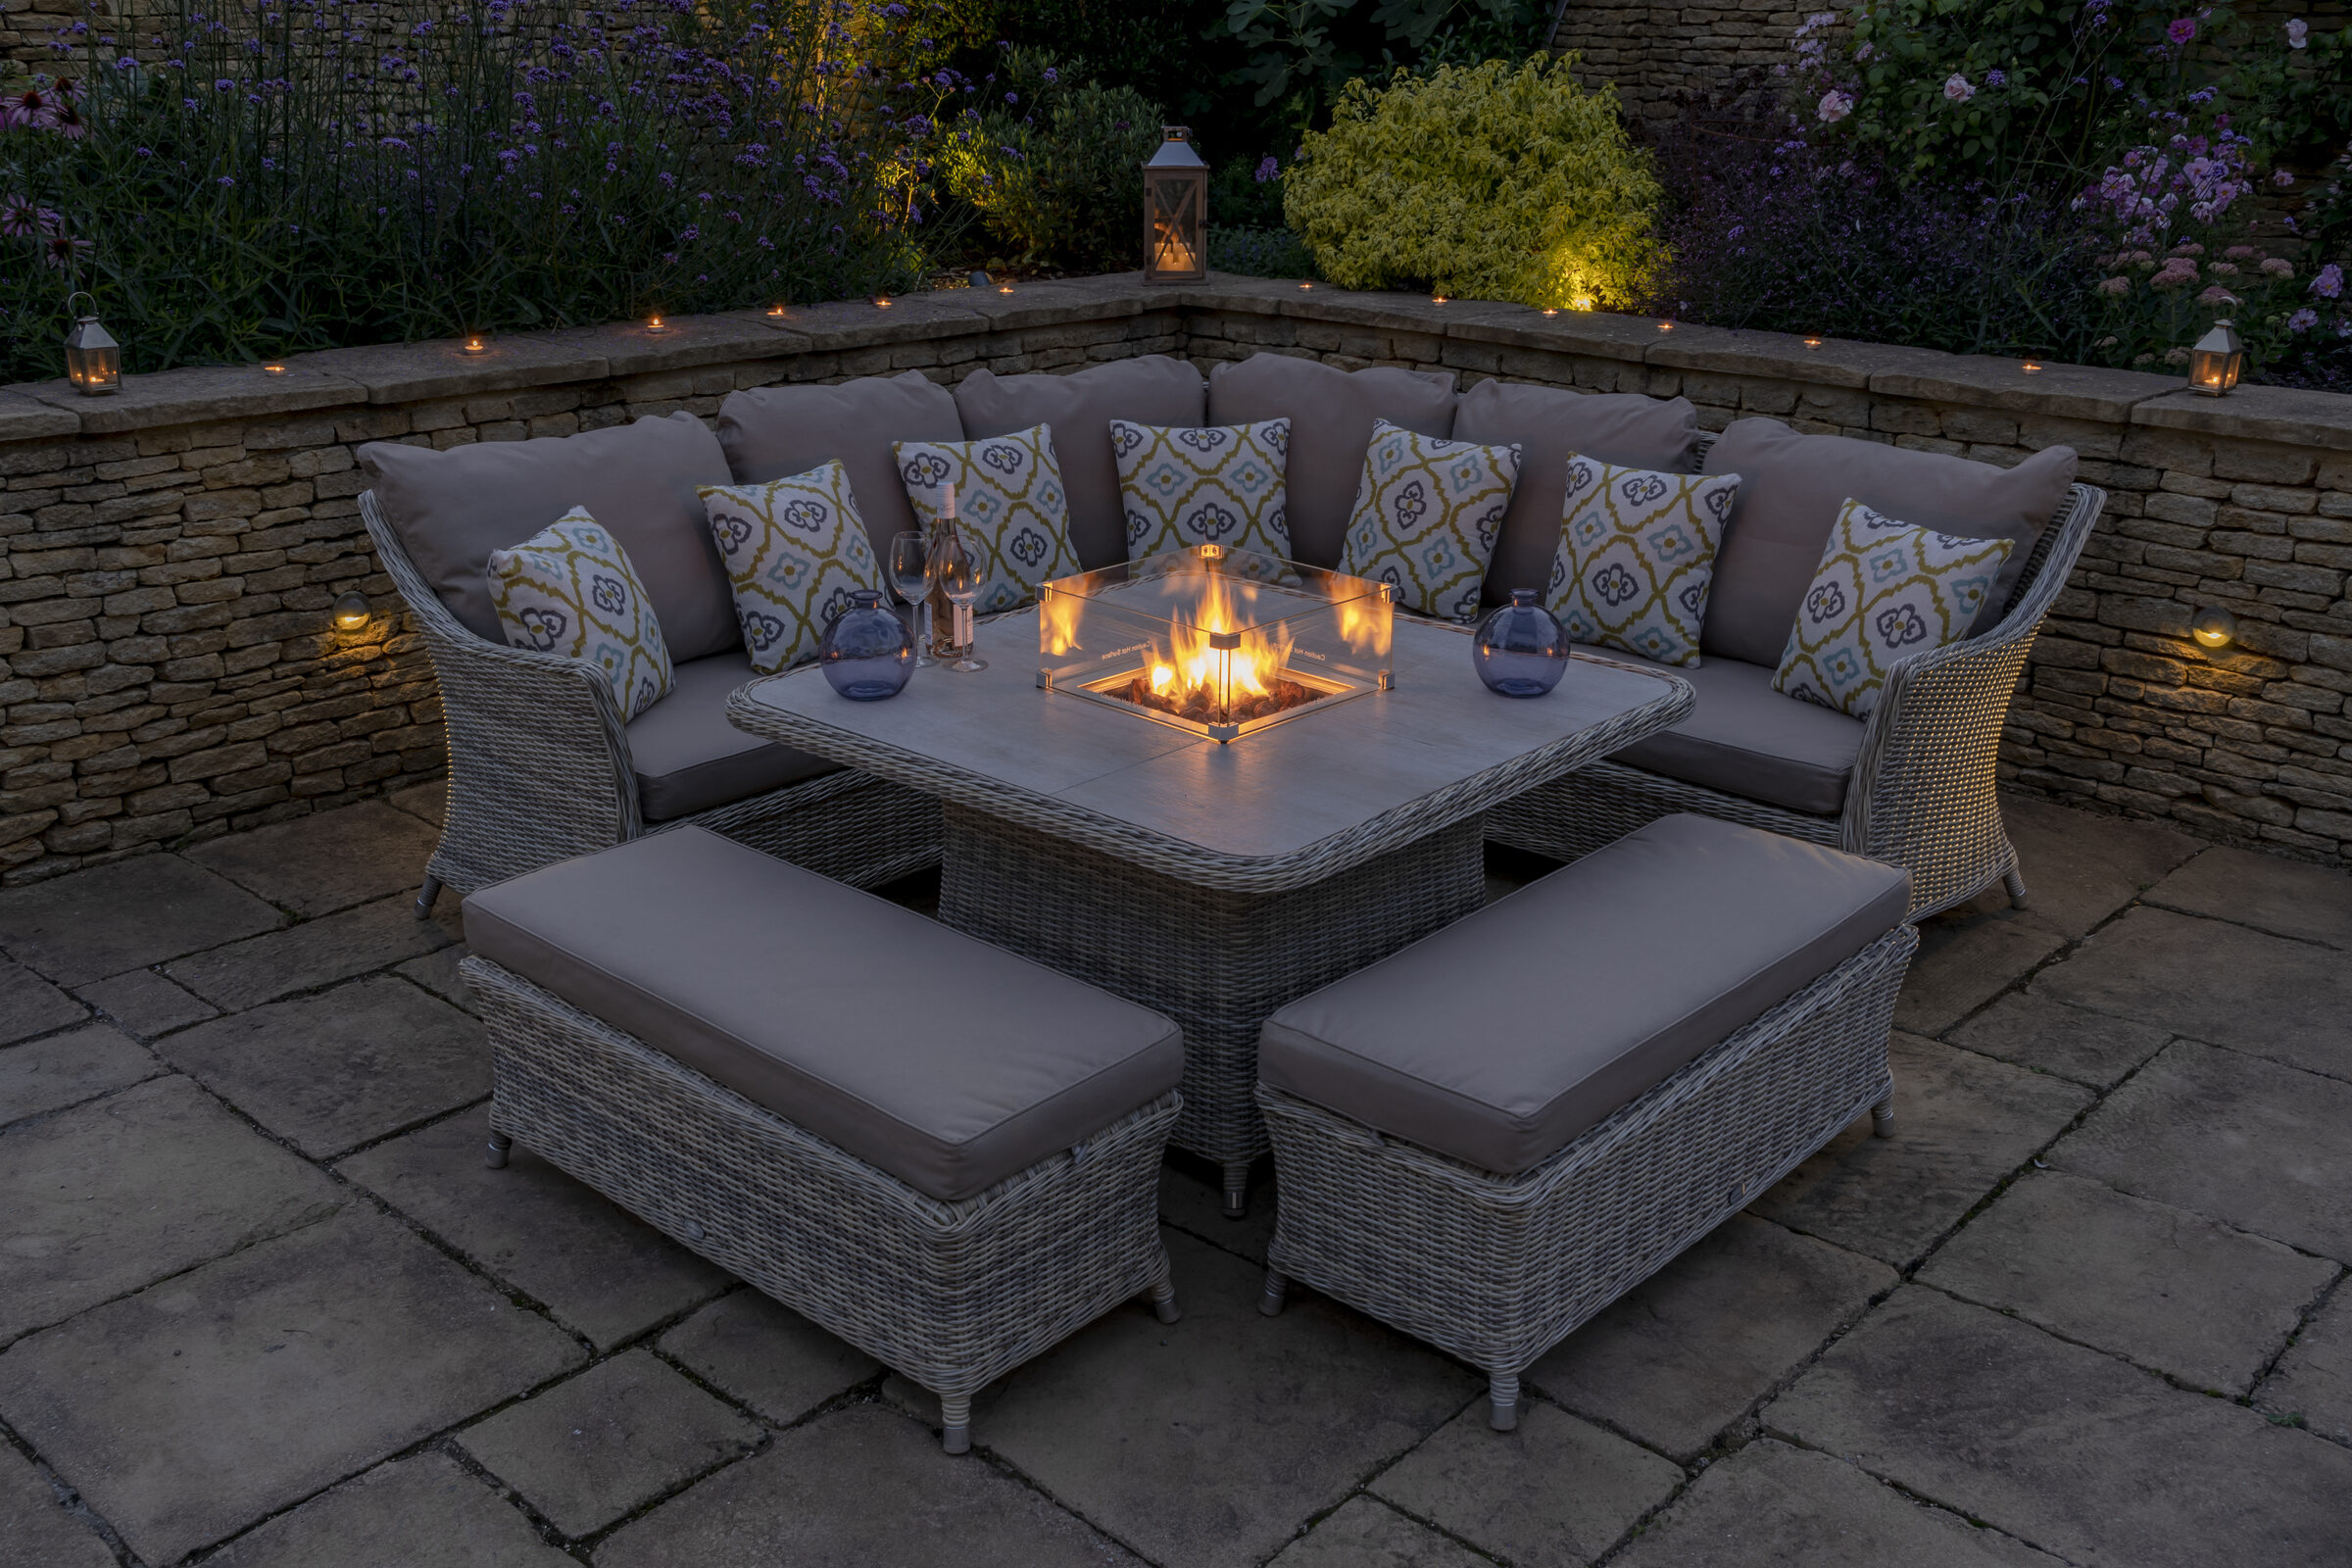 Bramblecrest Ascot Square Dining Set, Garden Table And Chairs With Fire Pit